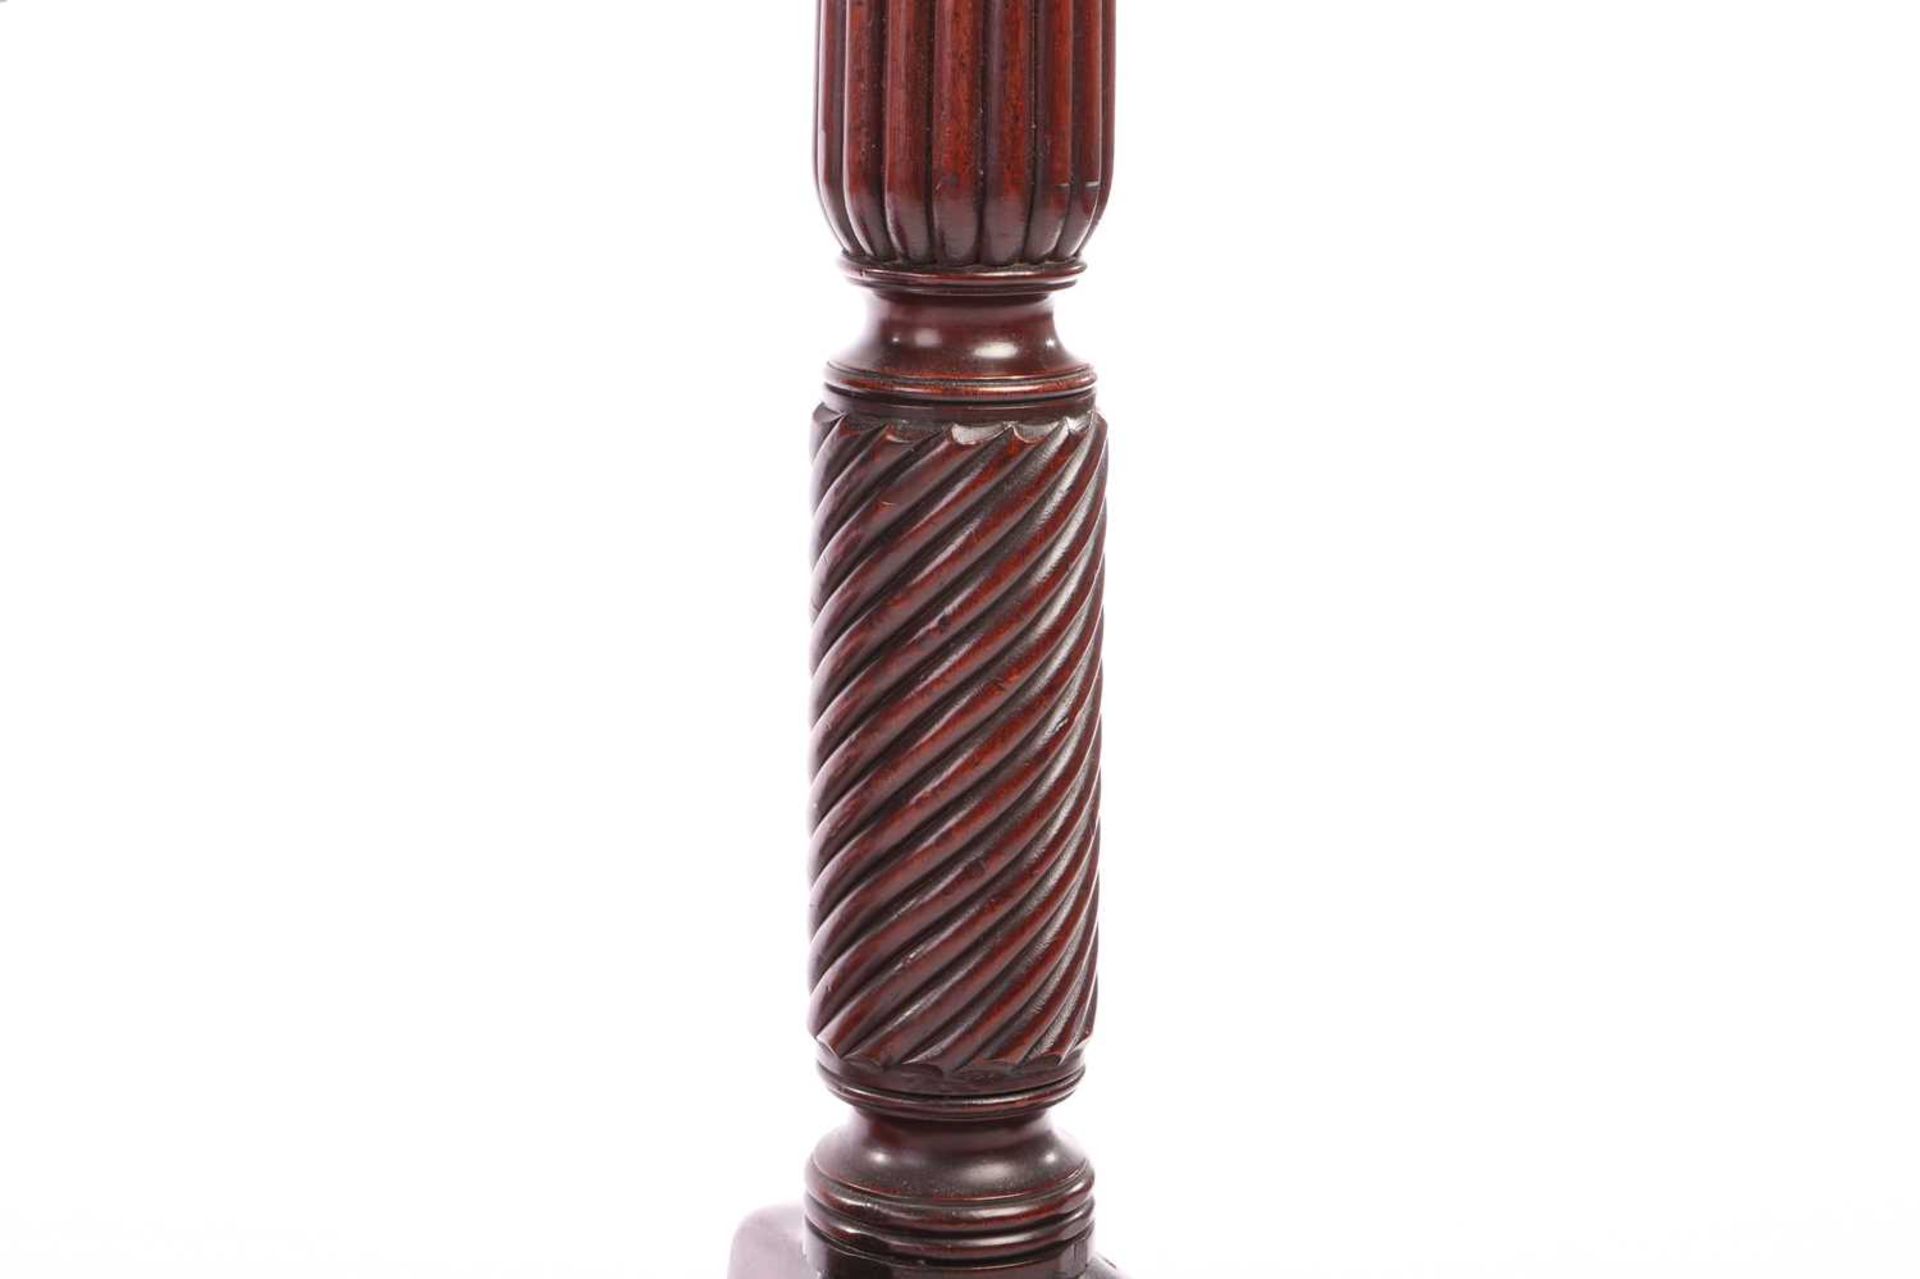 An Edwardian mahogany two-tier pedestal of architectural, form with dentil moulding and fluted colum - Image 5 of 6